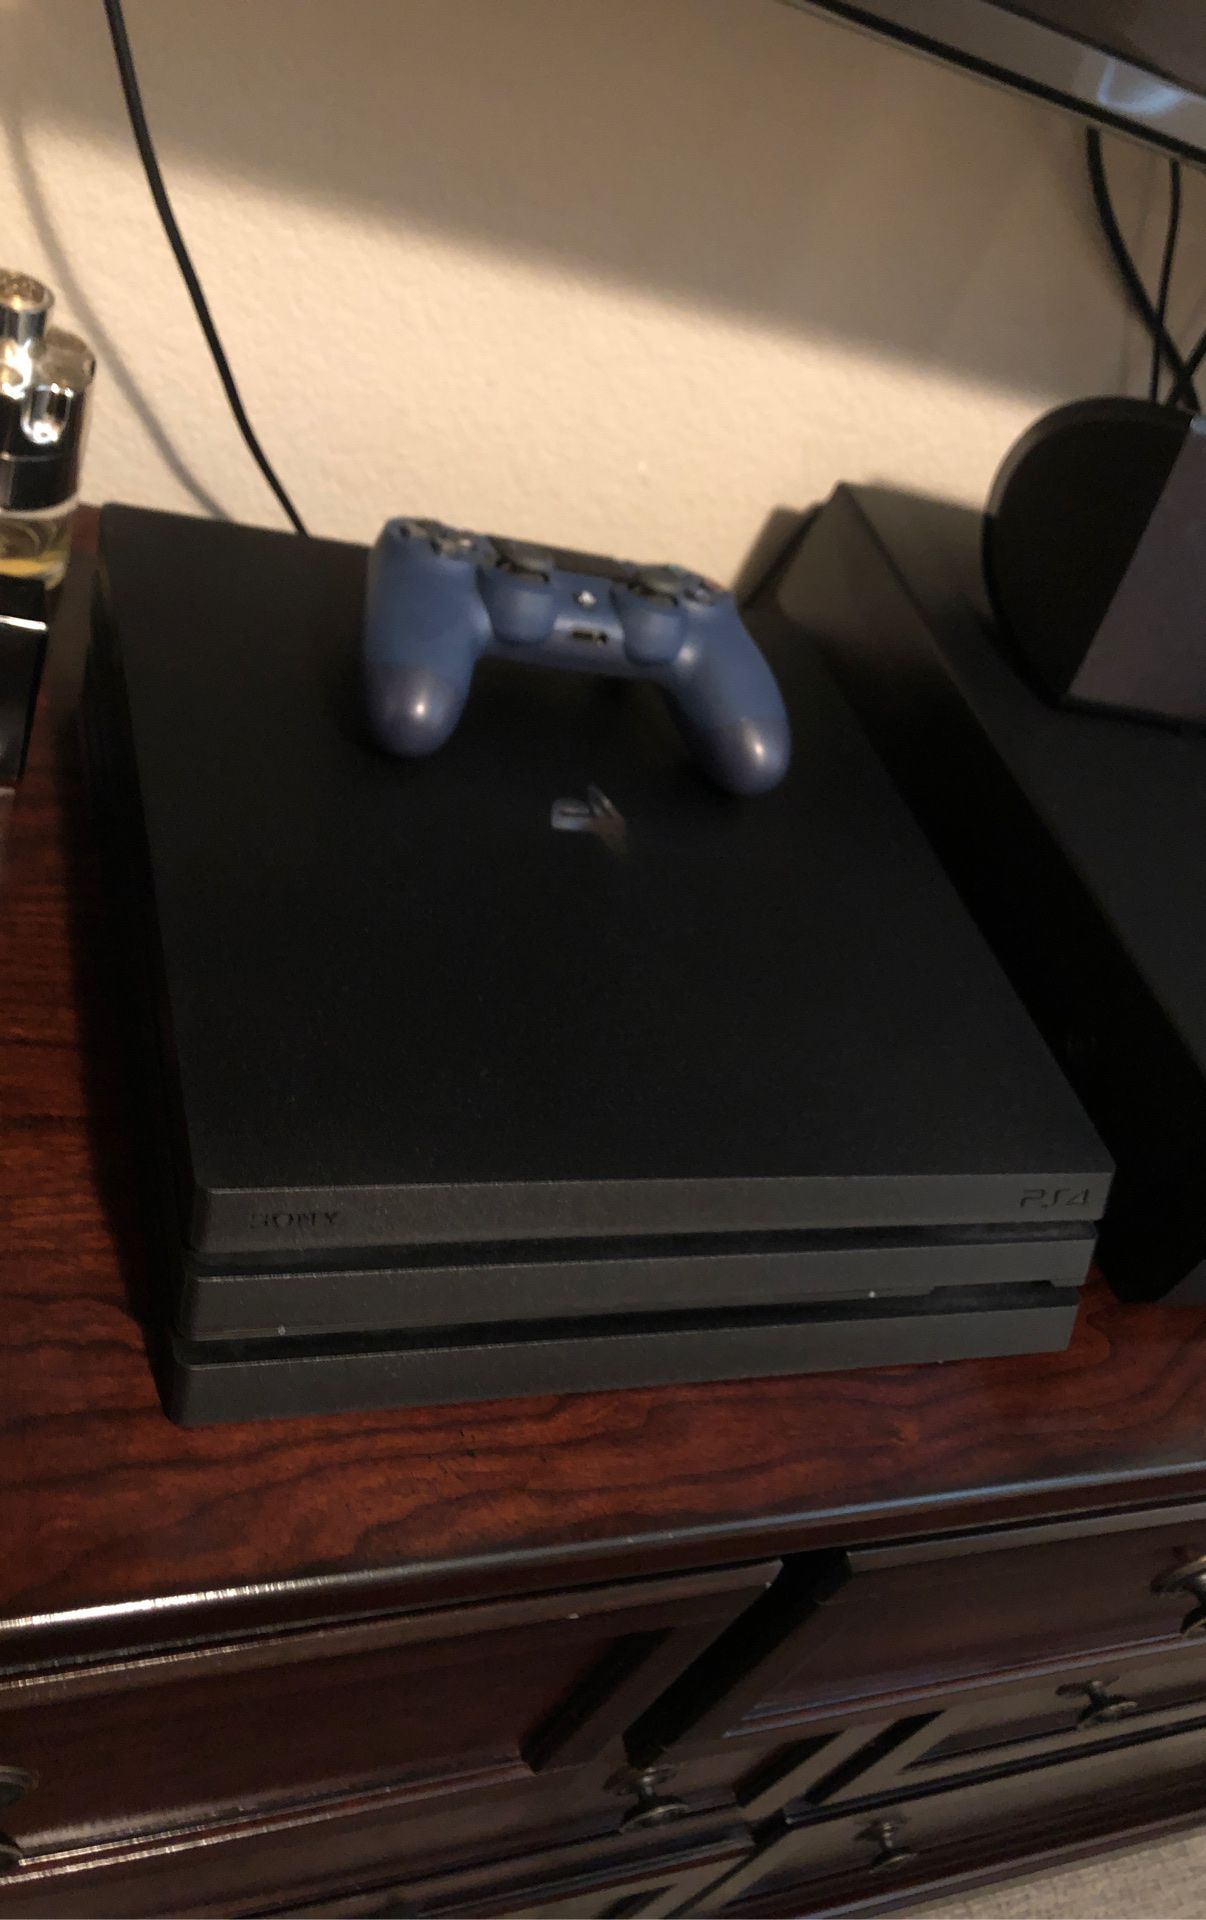 Brand new PS4 Pro in box